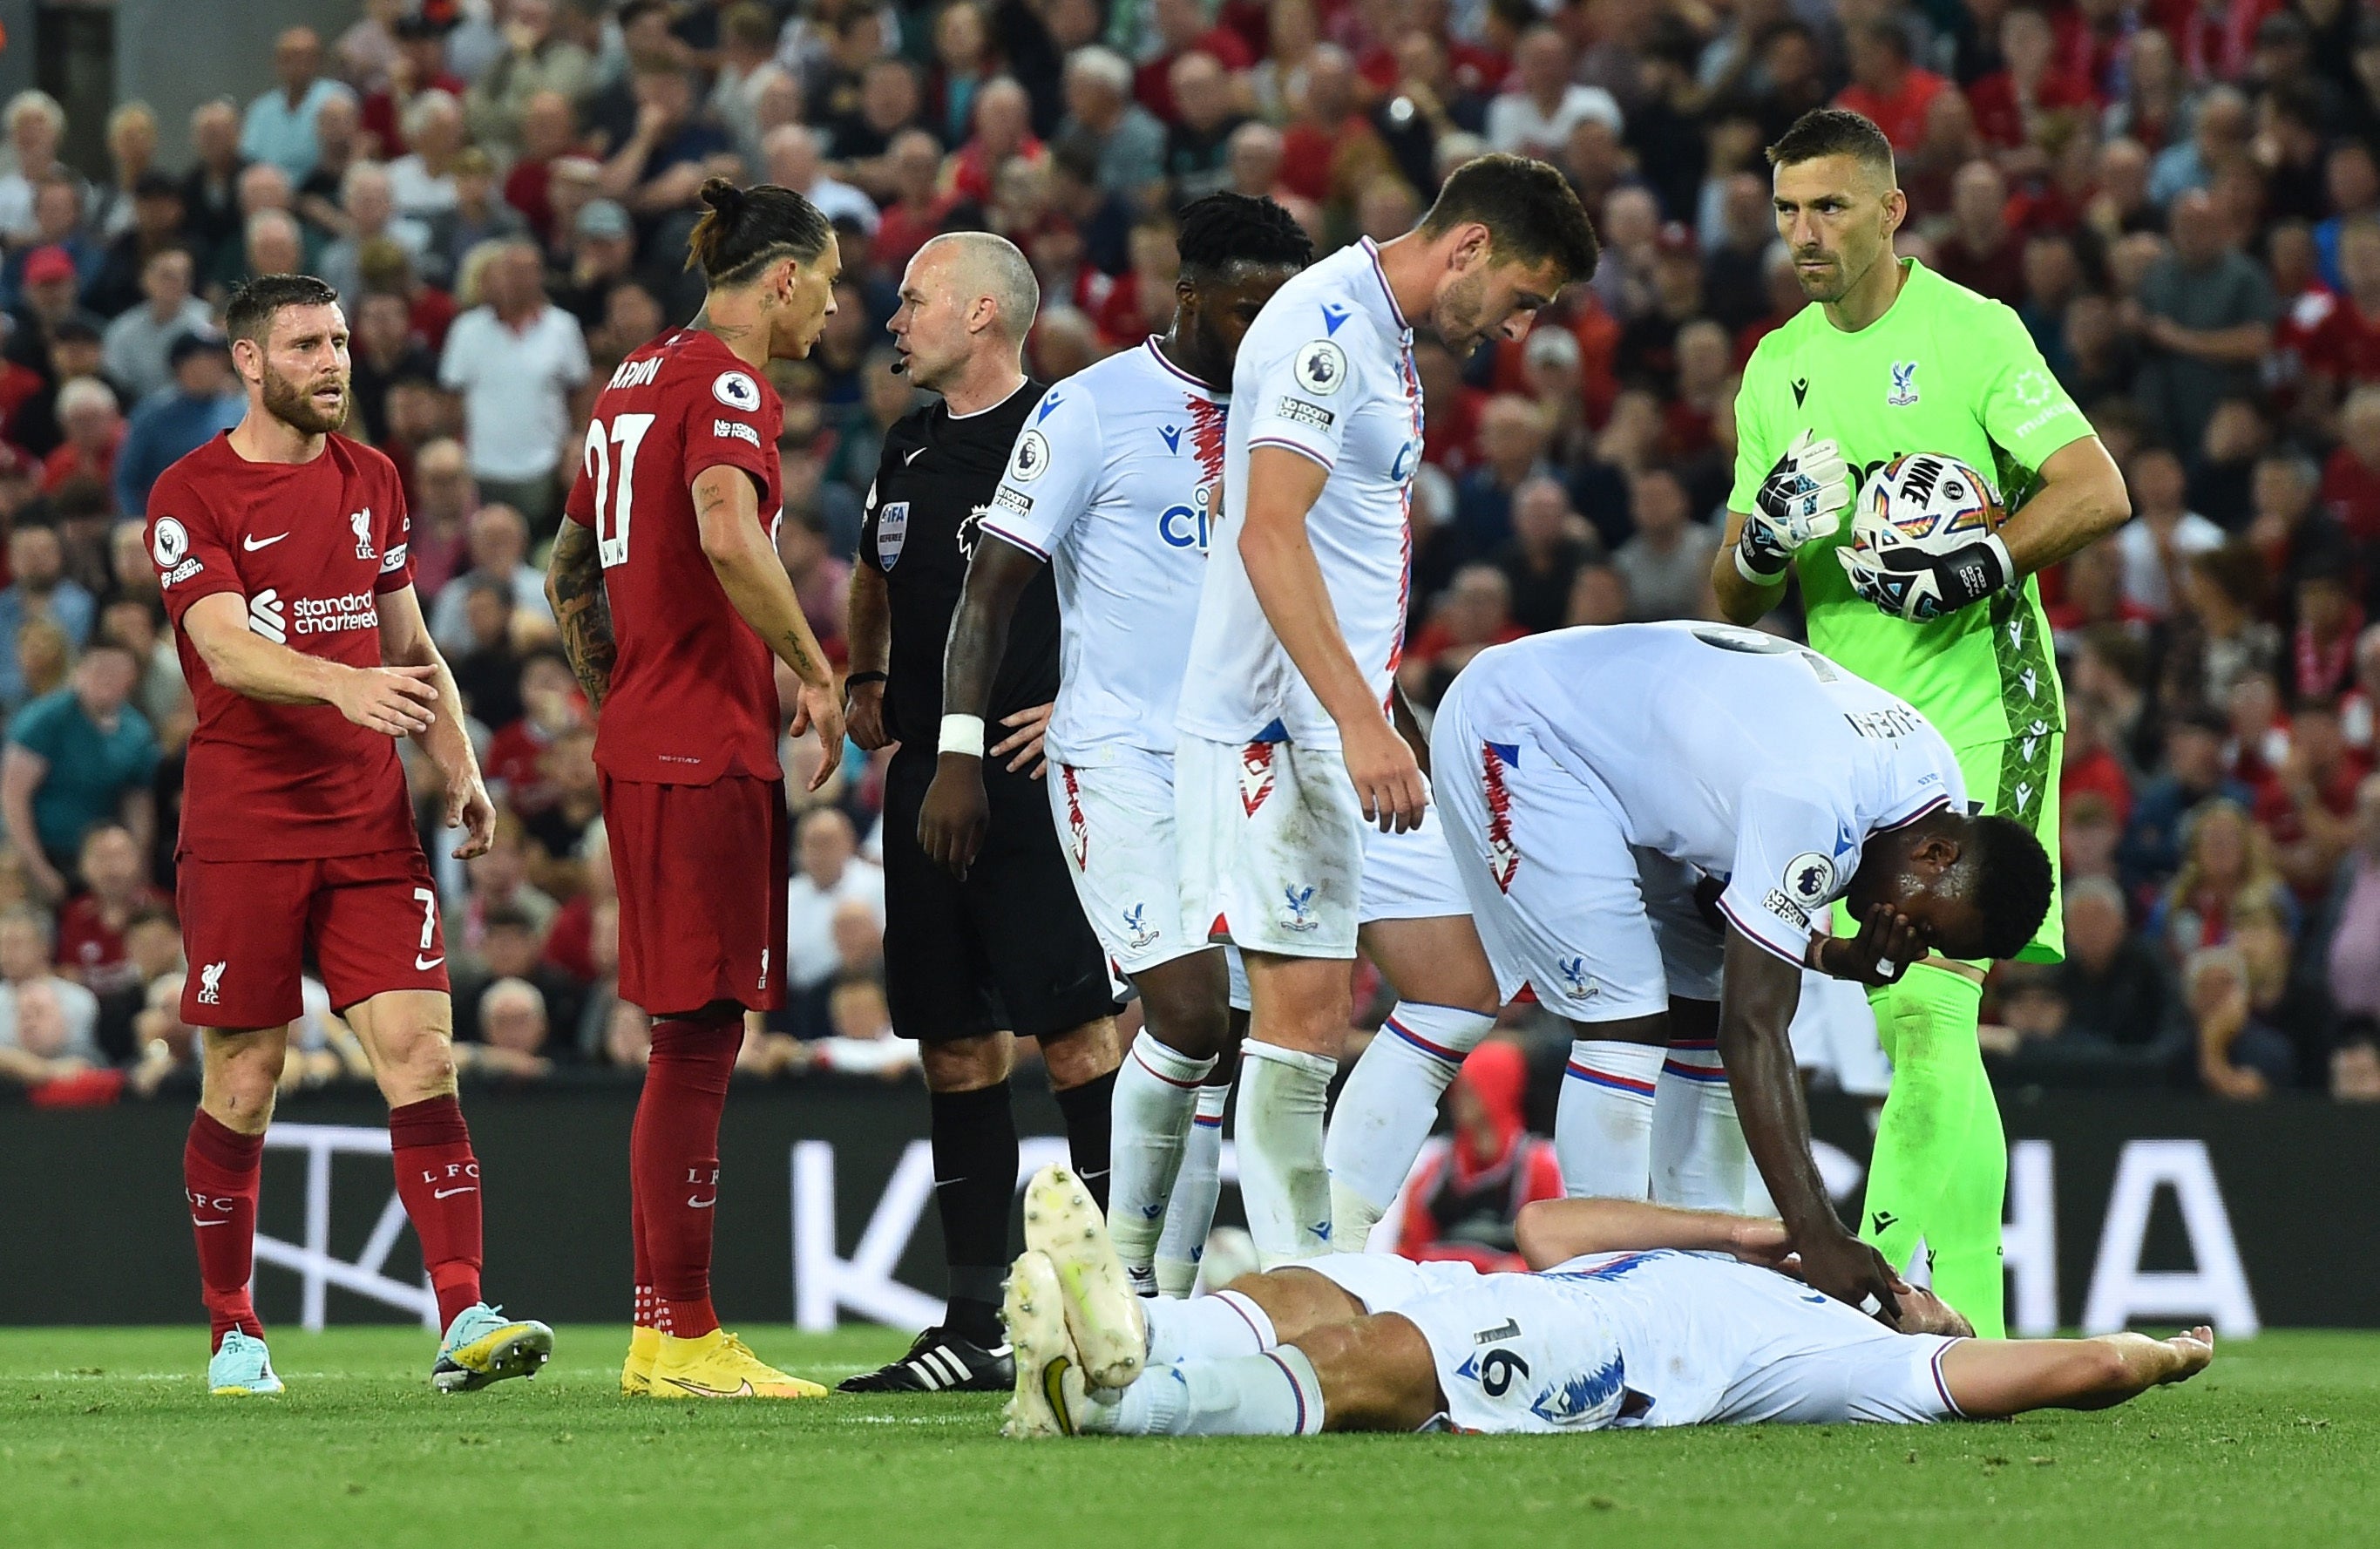 Crystal Palace’s Joachim Andersen is on the floor after sustaining an injury as Liverpool’s Darwin Nunez is sent off